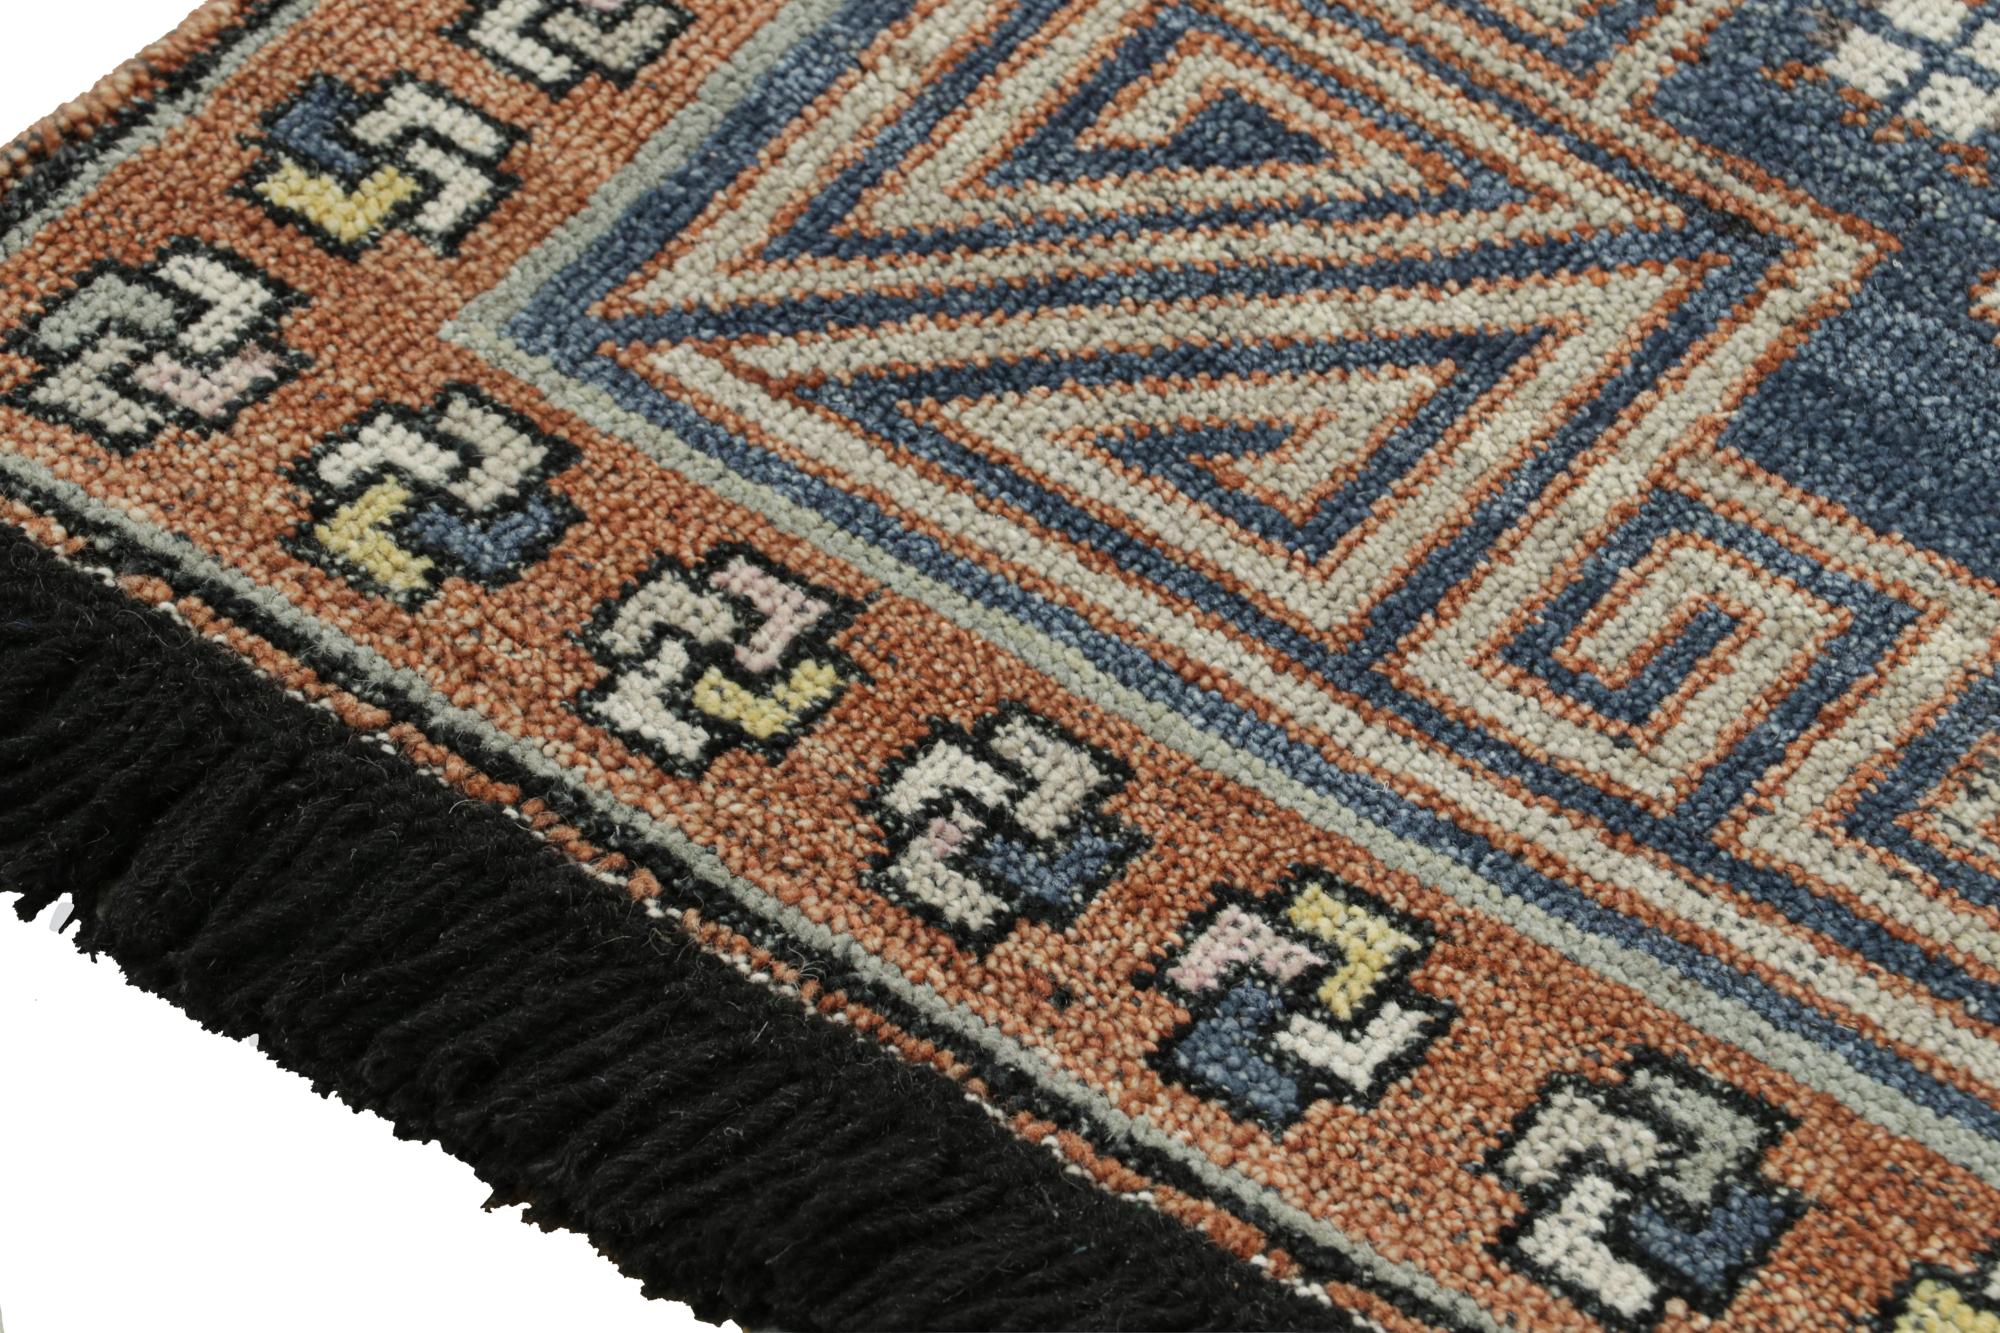 Rug & Kilim’s Khotan inspired rug in Brown & Blue Geometric Patterns In New Condition For Sale In Long Island City, NY